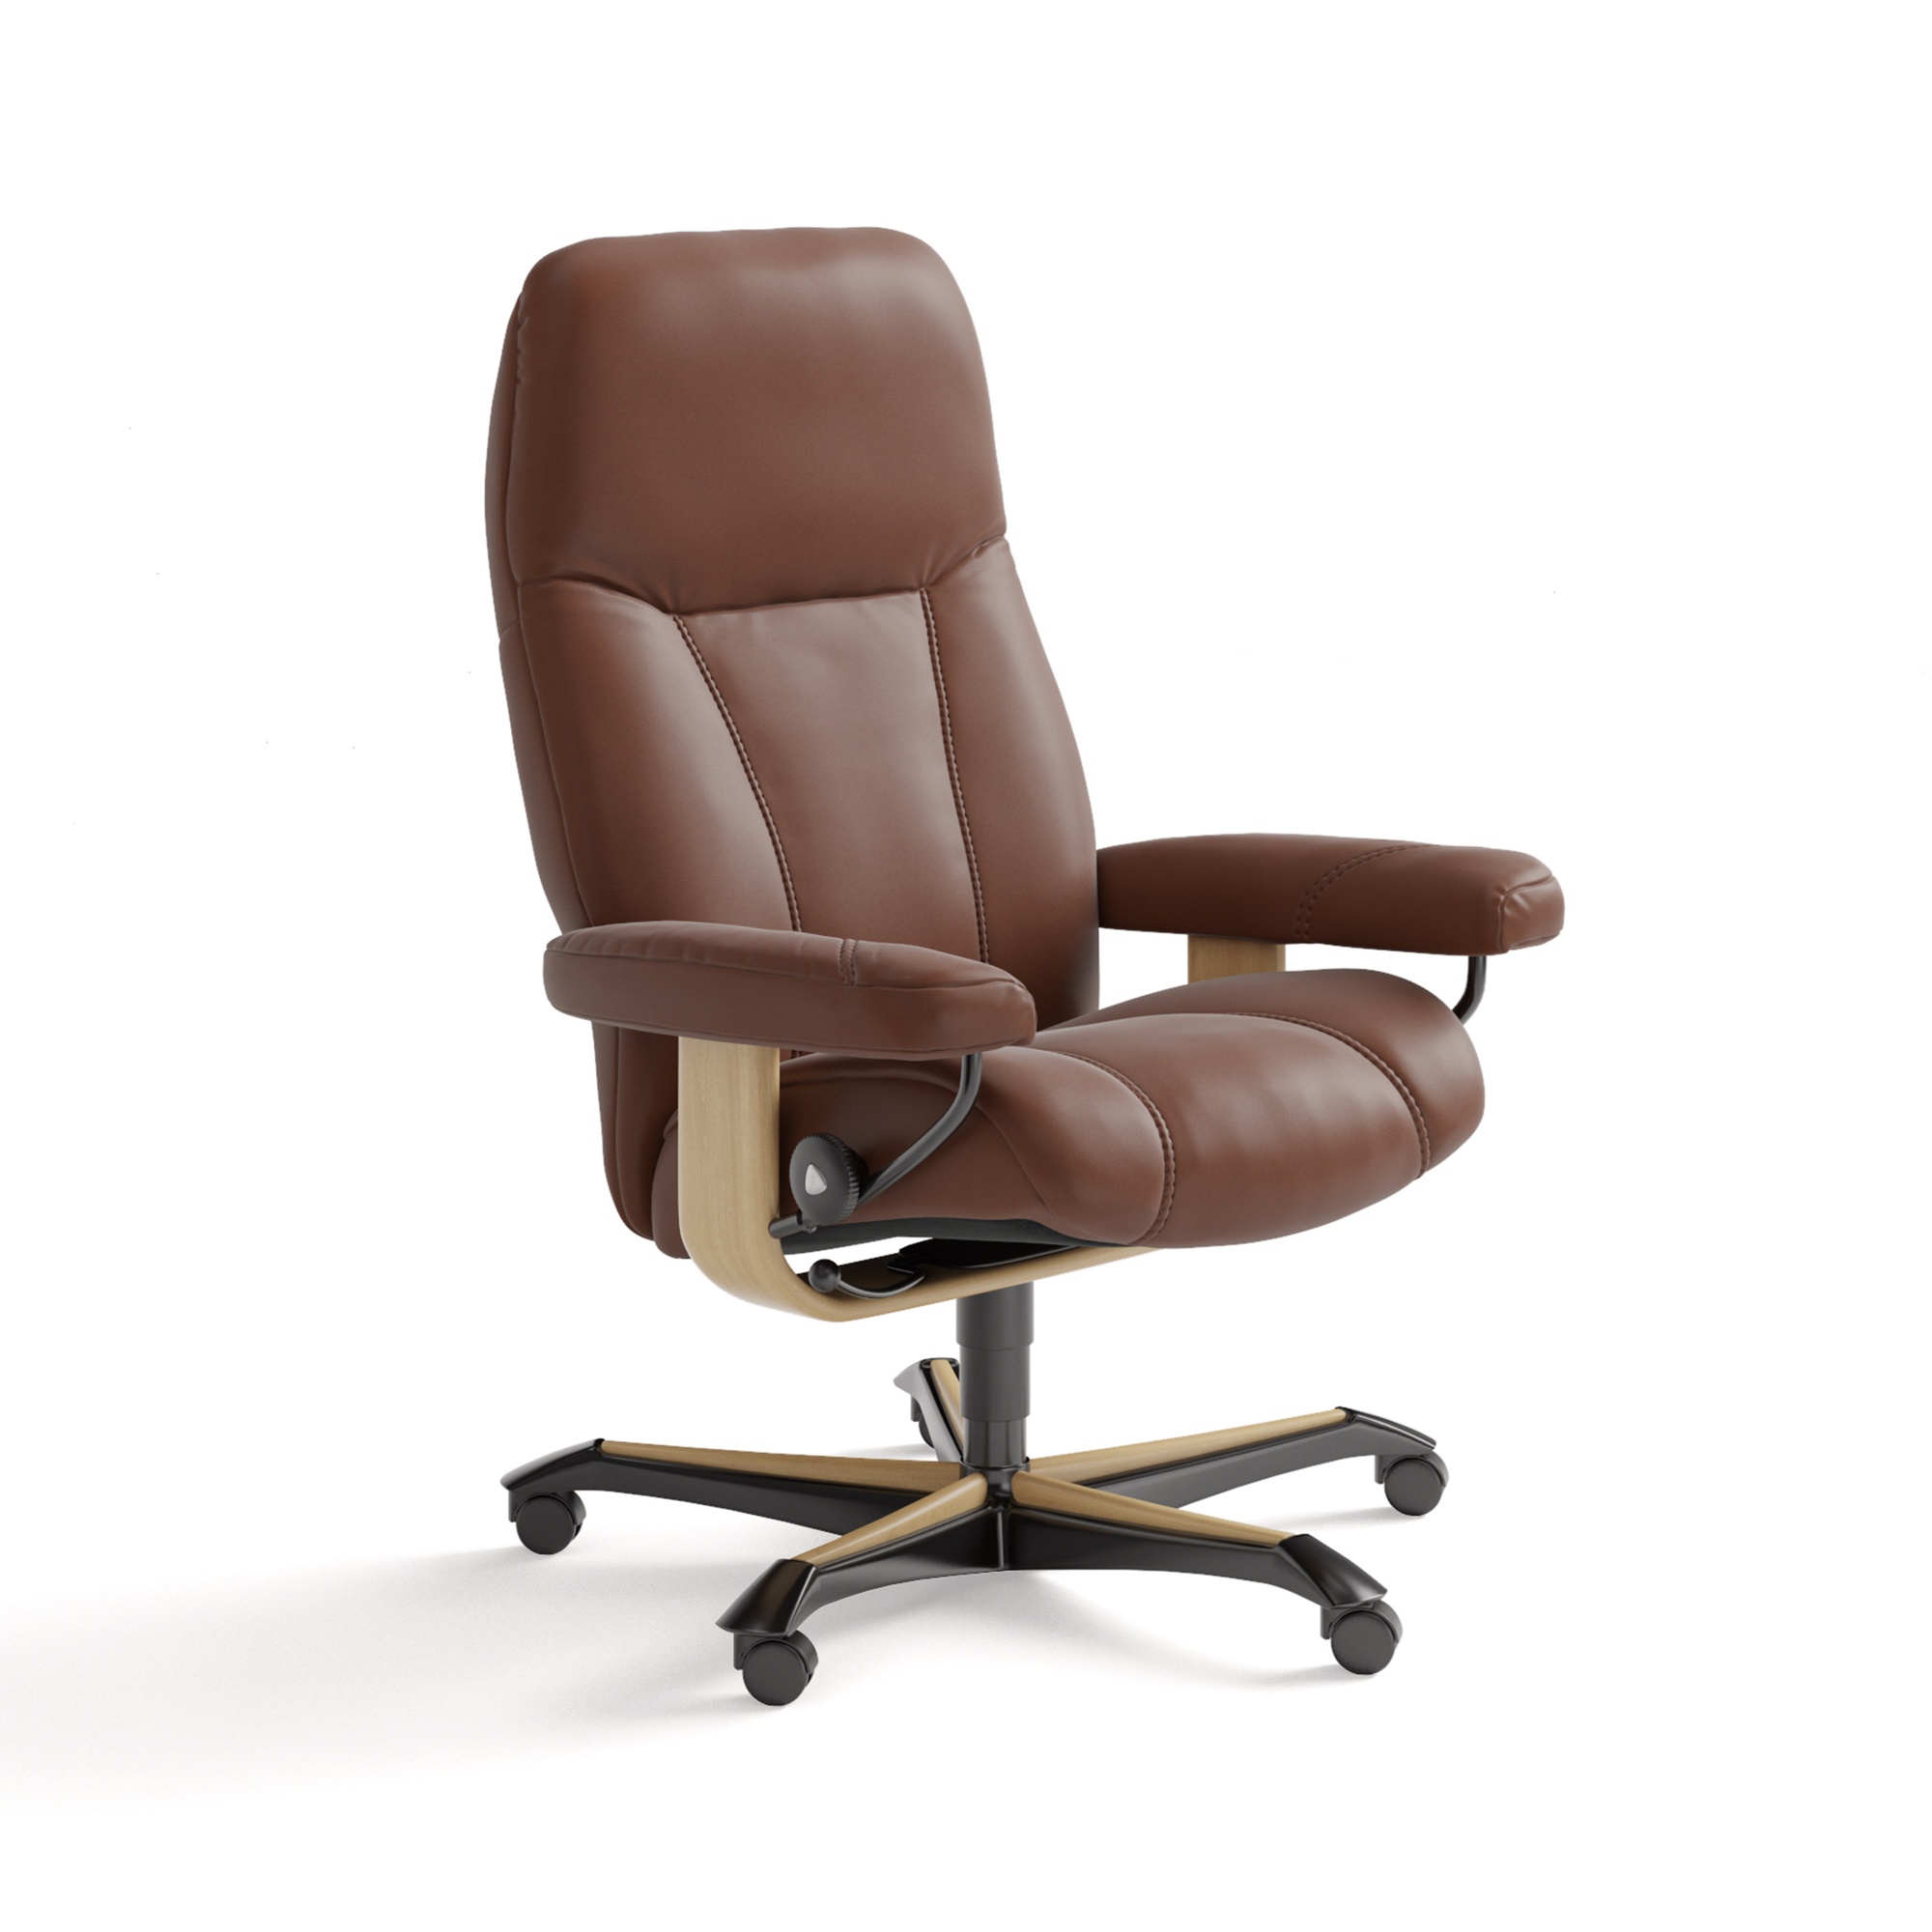 Stressless Consul Office Chair, Stressless Leather Chairs